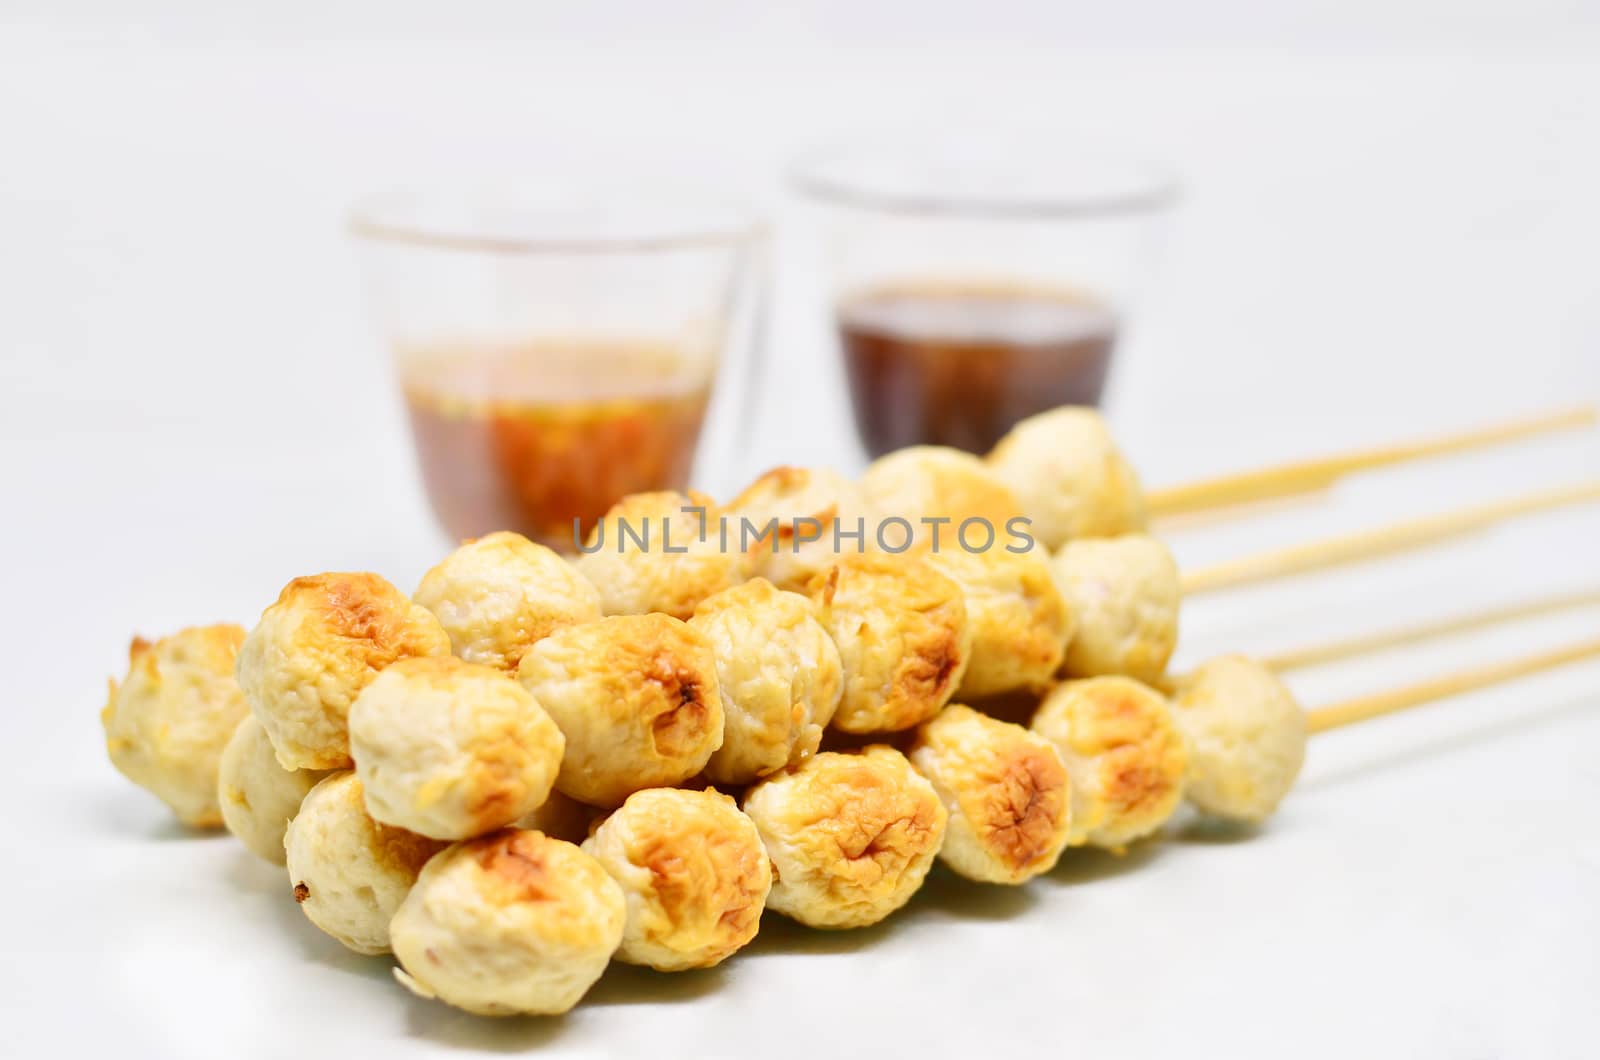 Meatball with thai spicy sauce on white background by phochi